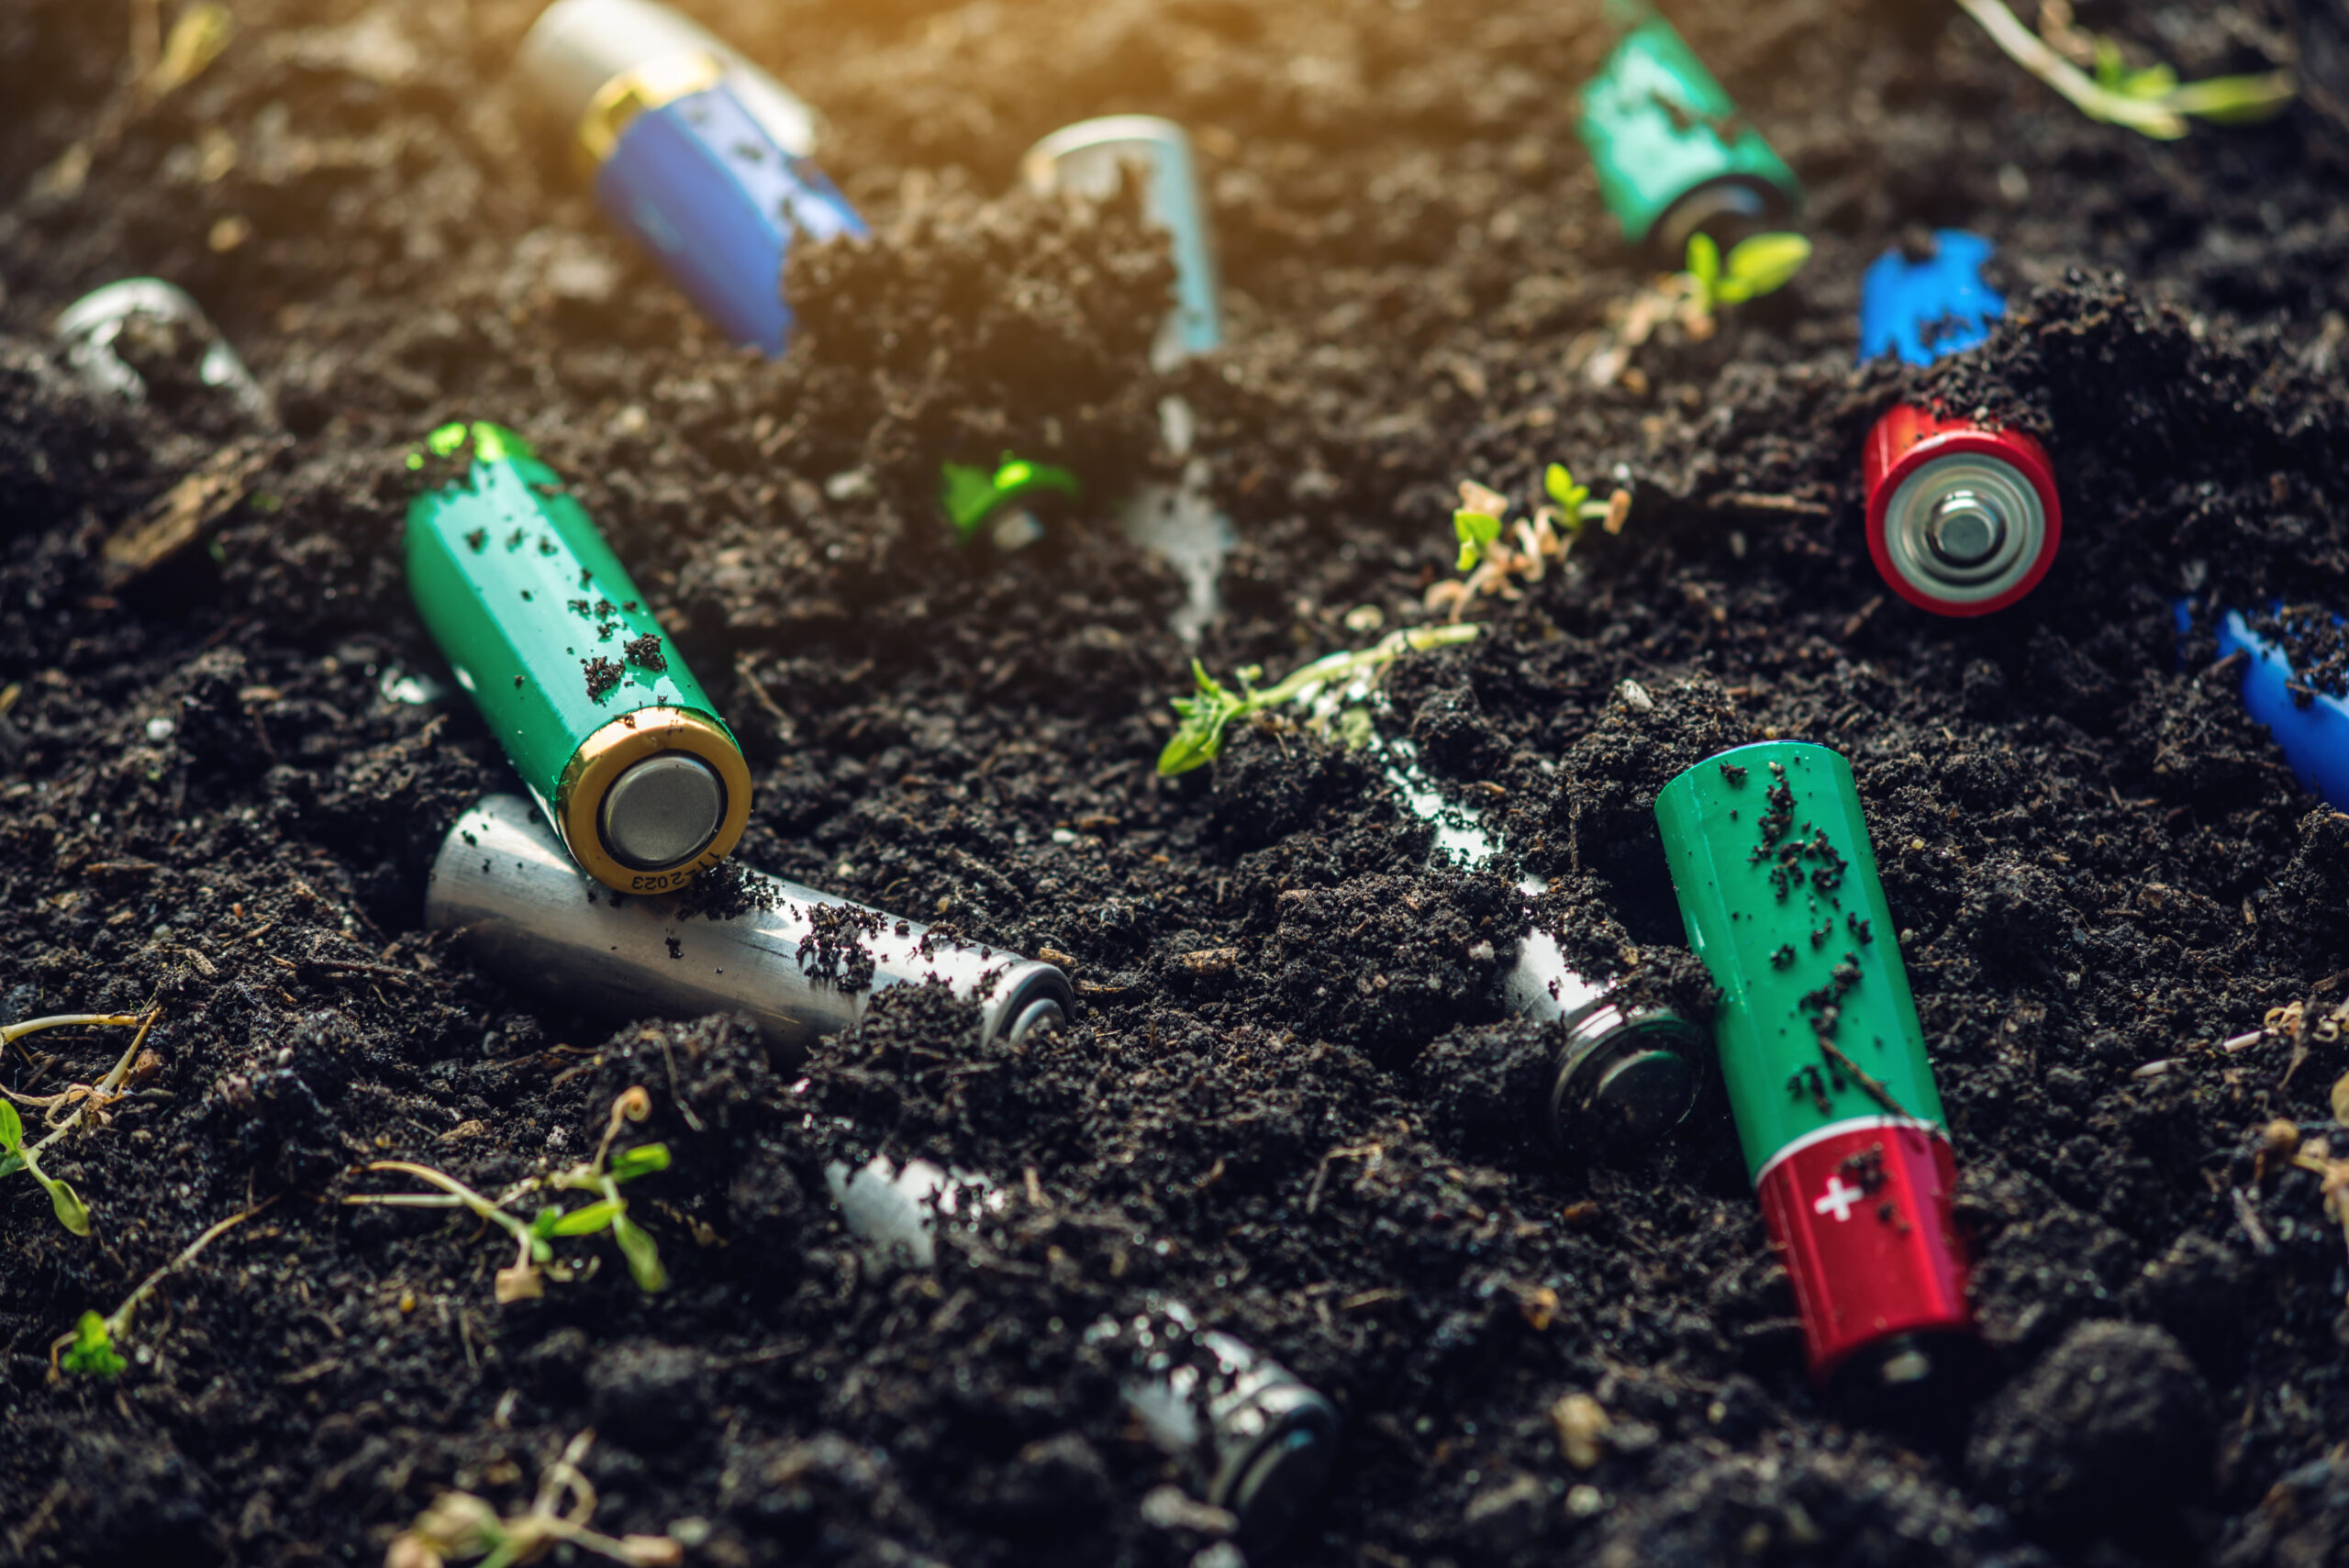 Used alkaline batteries lie in the soil where plants grow. Concept of environmental pollution with toxic household waste